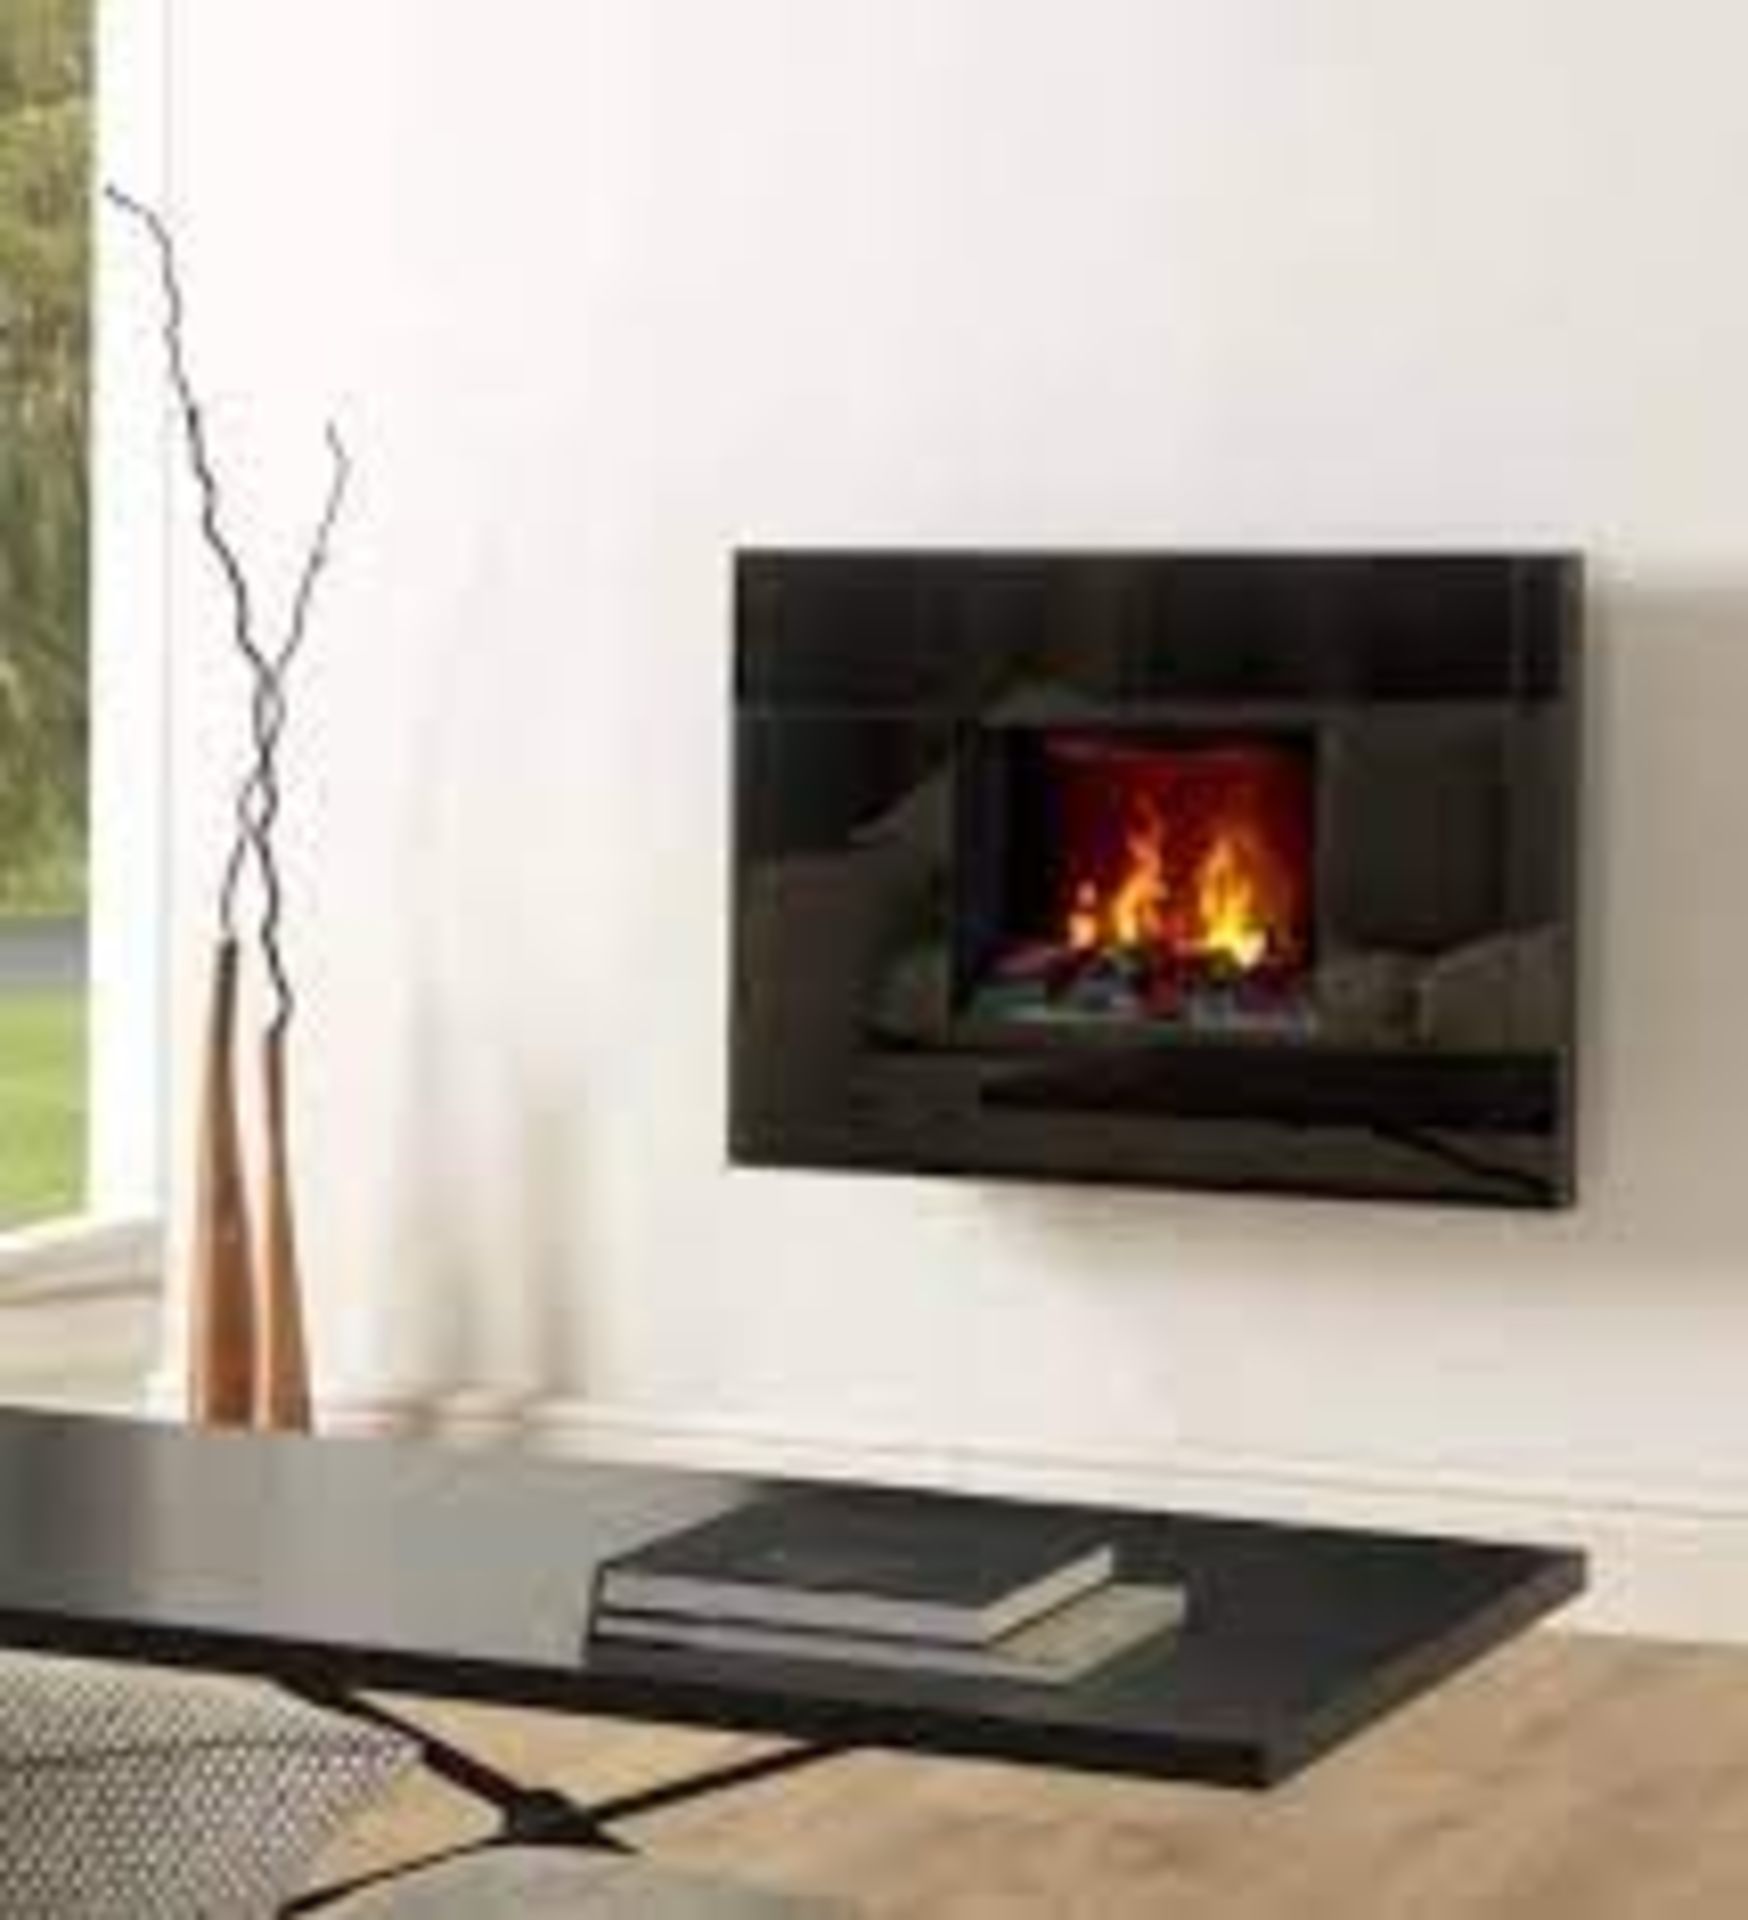 Dimplex Tahoe Wall mounting Electric Fire - TAH20 OMWFC20. - ER32. RRP £750.00.